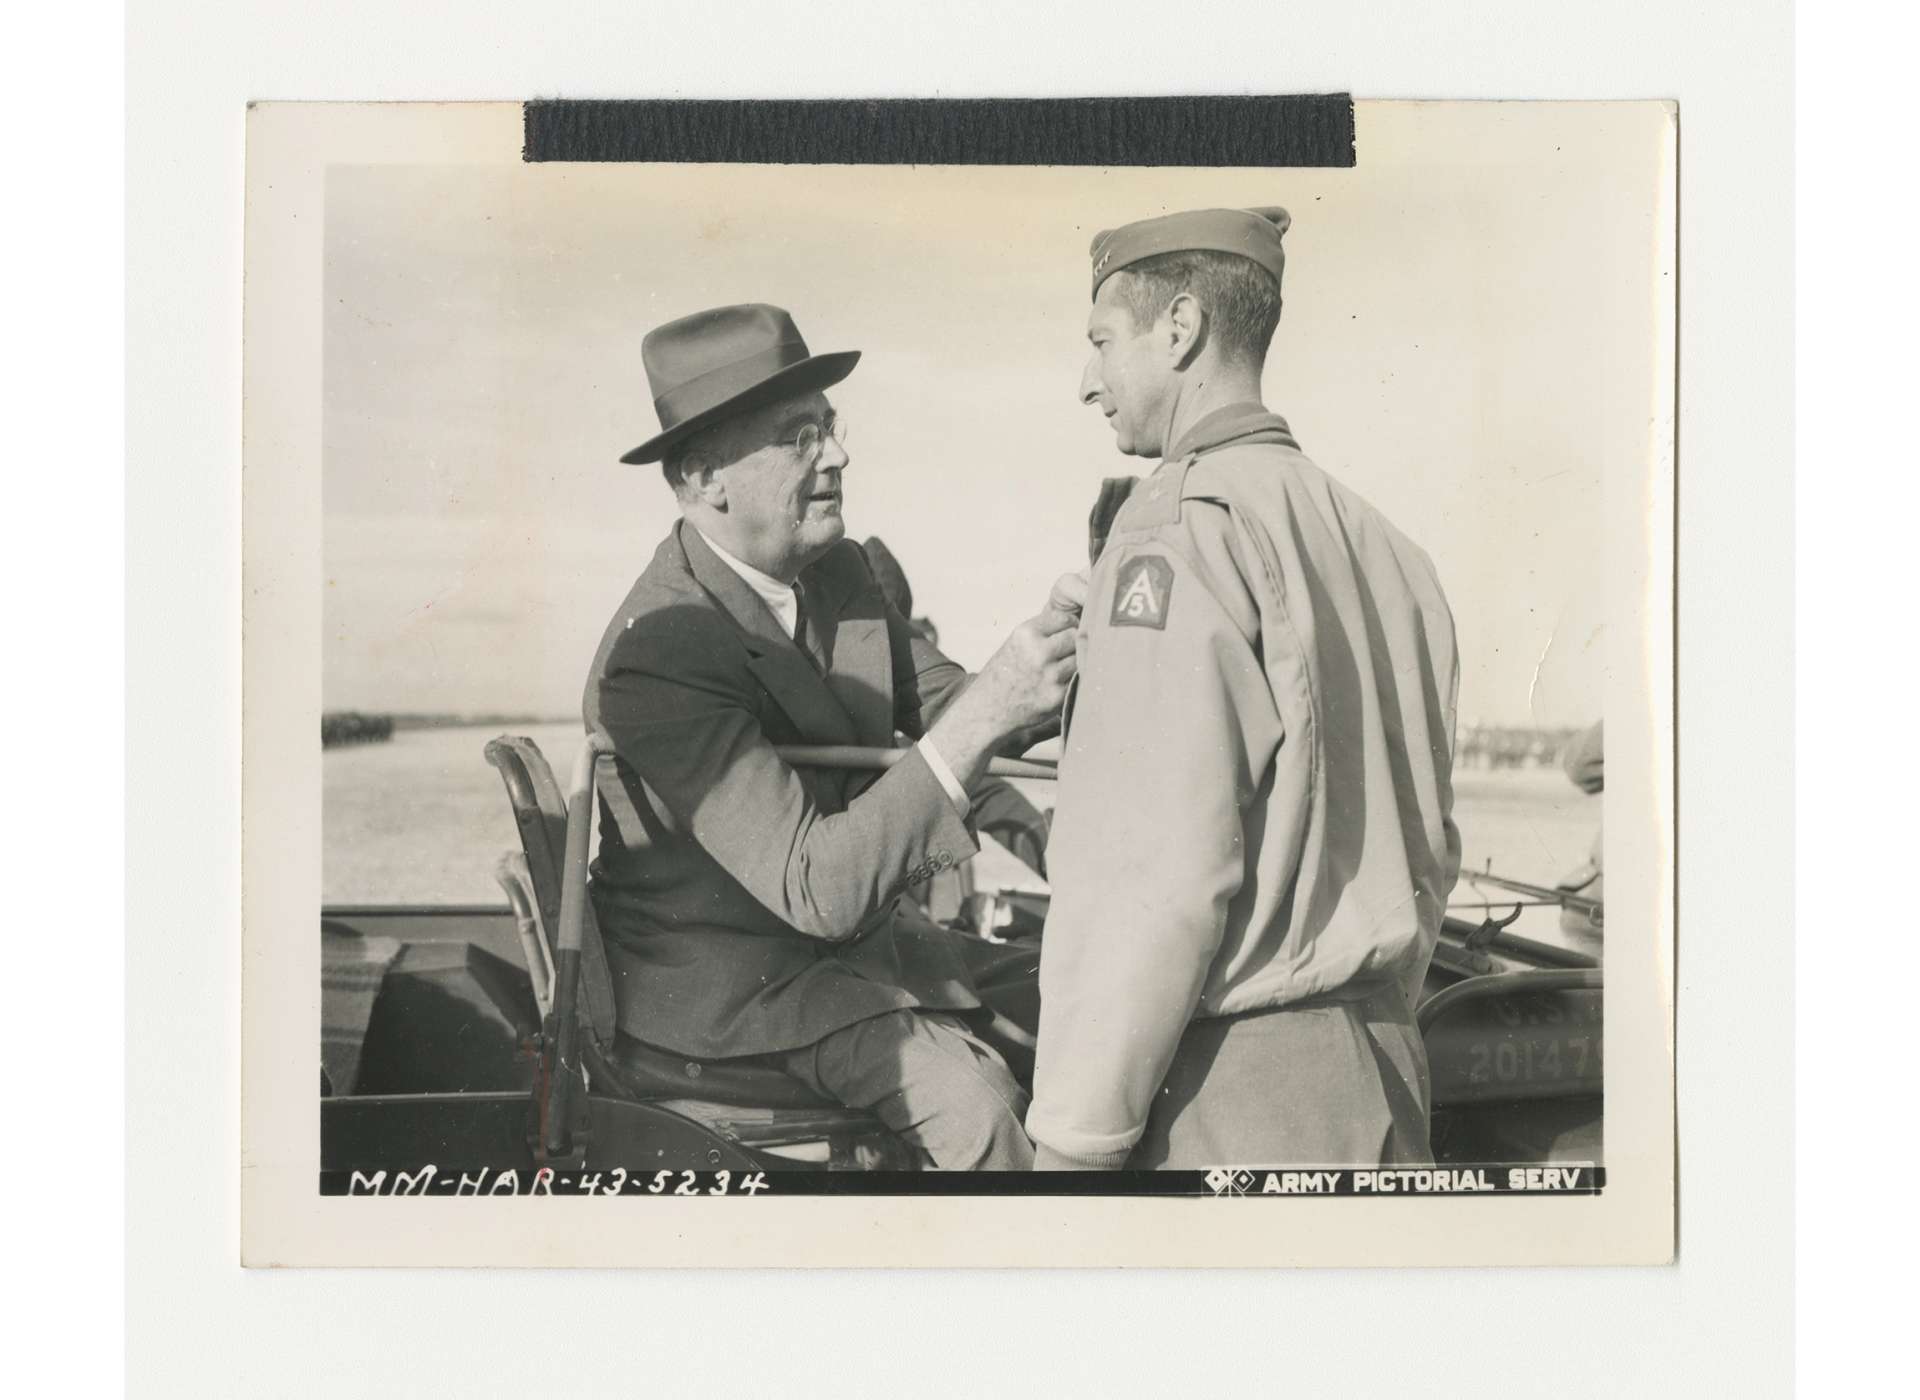 President Franklin D. Roosevelt pins the Distinguished Service Cross on General Mark Clark, commander of US Fifth Army, at Castelvetrano, Sicily, December 10, 1943. US Army Signal Corps photo, gift of Ms. Regan Forrester, from the Collection of The National WWII Museum, 2002.337.423.